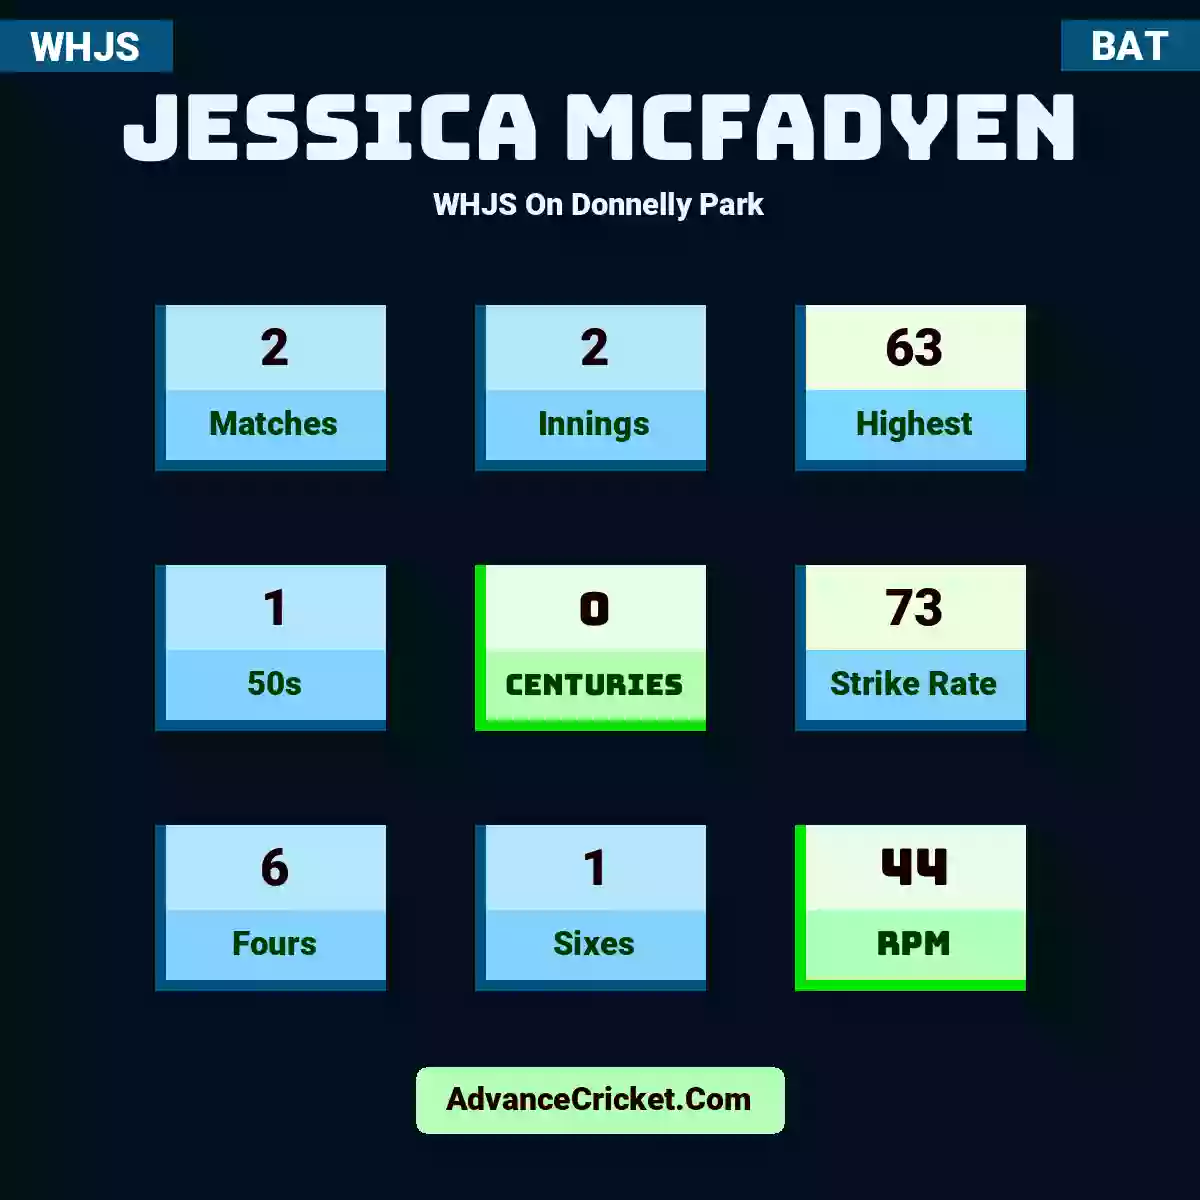 Jessica McFadyen WHJS  On Donnelly Park, Jessica McFadyen played 2 matches, scored 63 runs as highest, 1 half-centuries, and 0 centuries, with a strike rate of 73. J.McFadyen hit 6 fours and 1 sixes, with an RPM of 44.